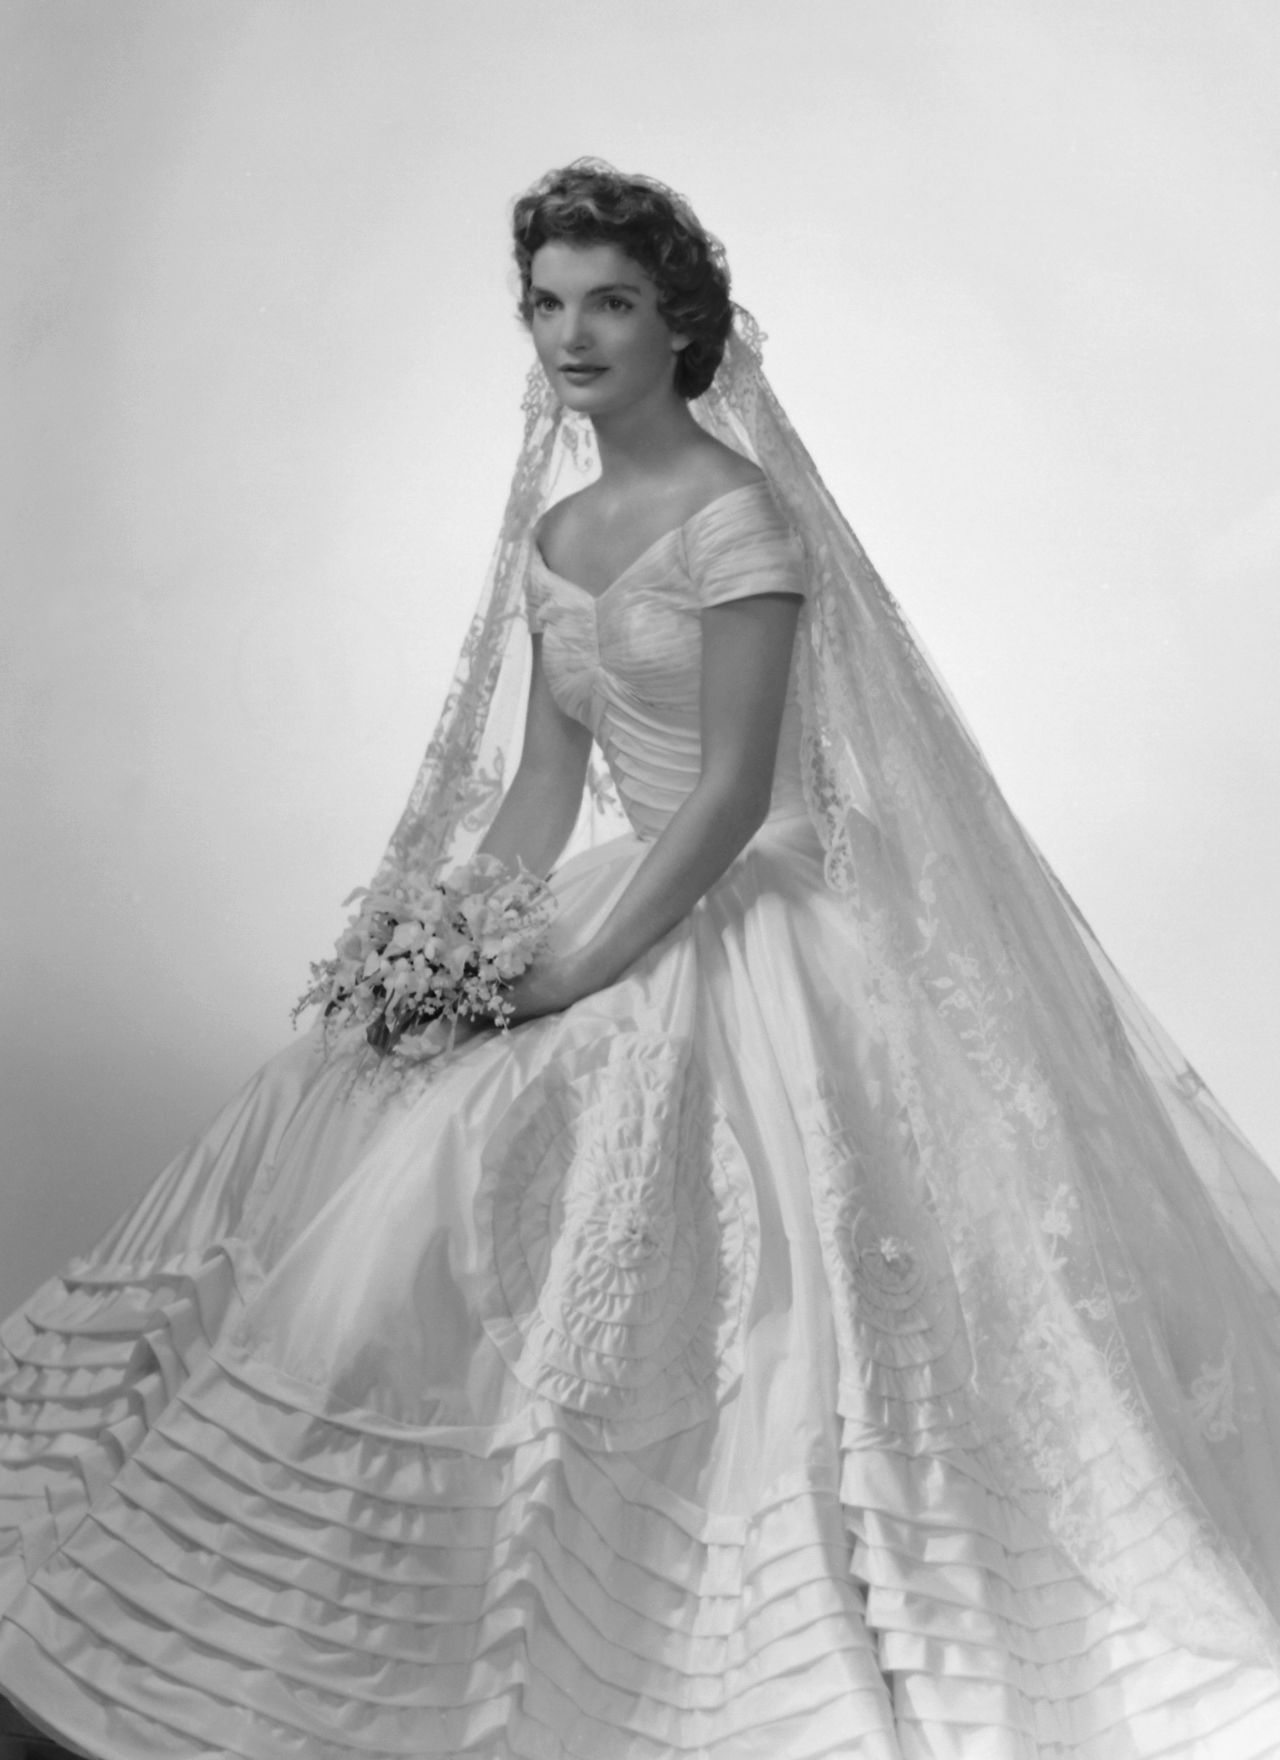 This bridal portrait of Jackie Kennedy captures the finery of her Ann Lowe-designed wedding dress.